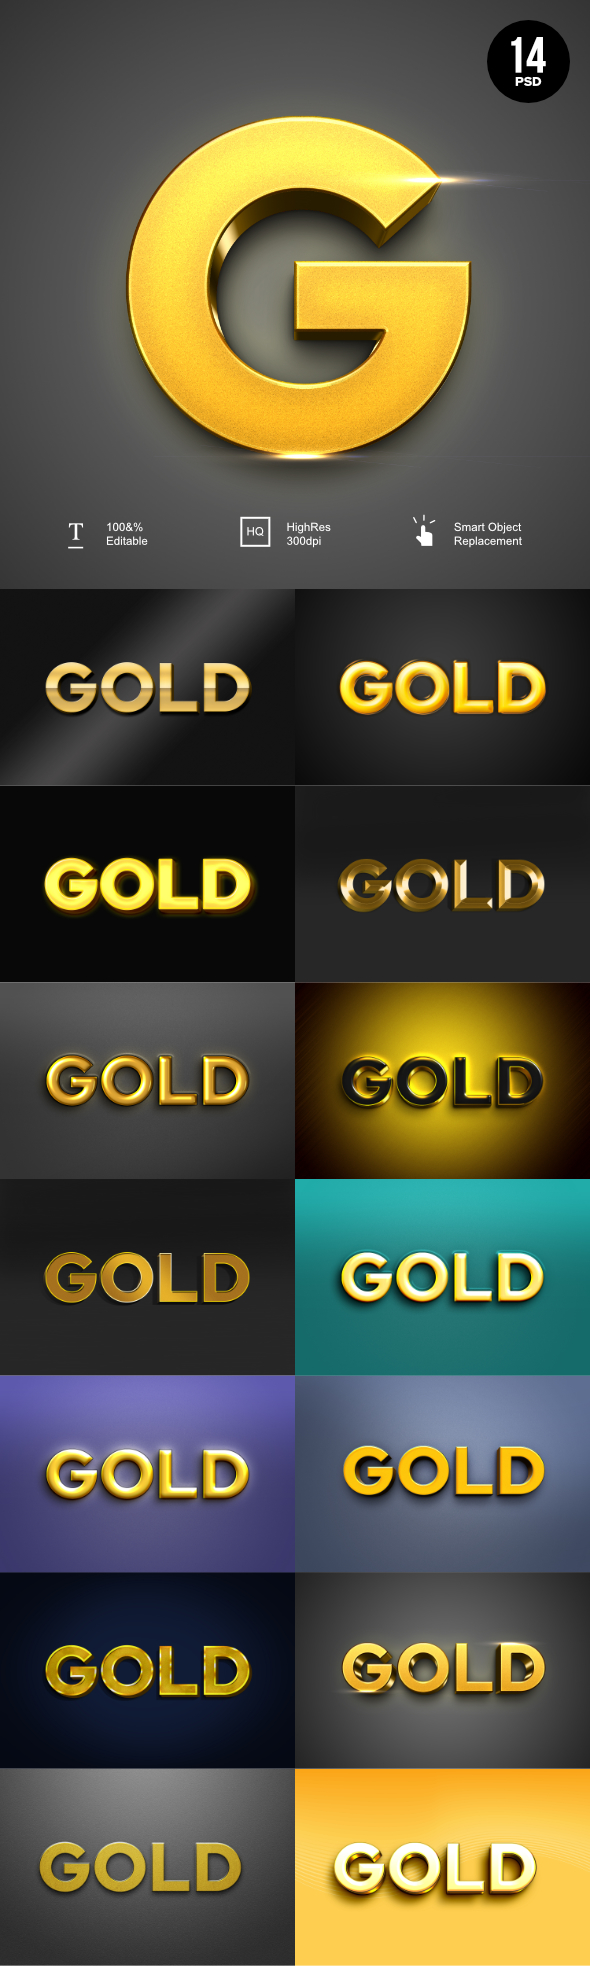 [DOWNLOAD]14 Gold Text Effect PSD